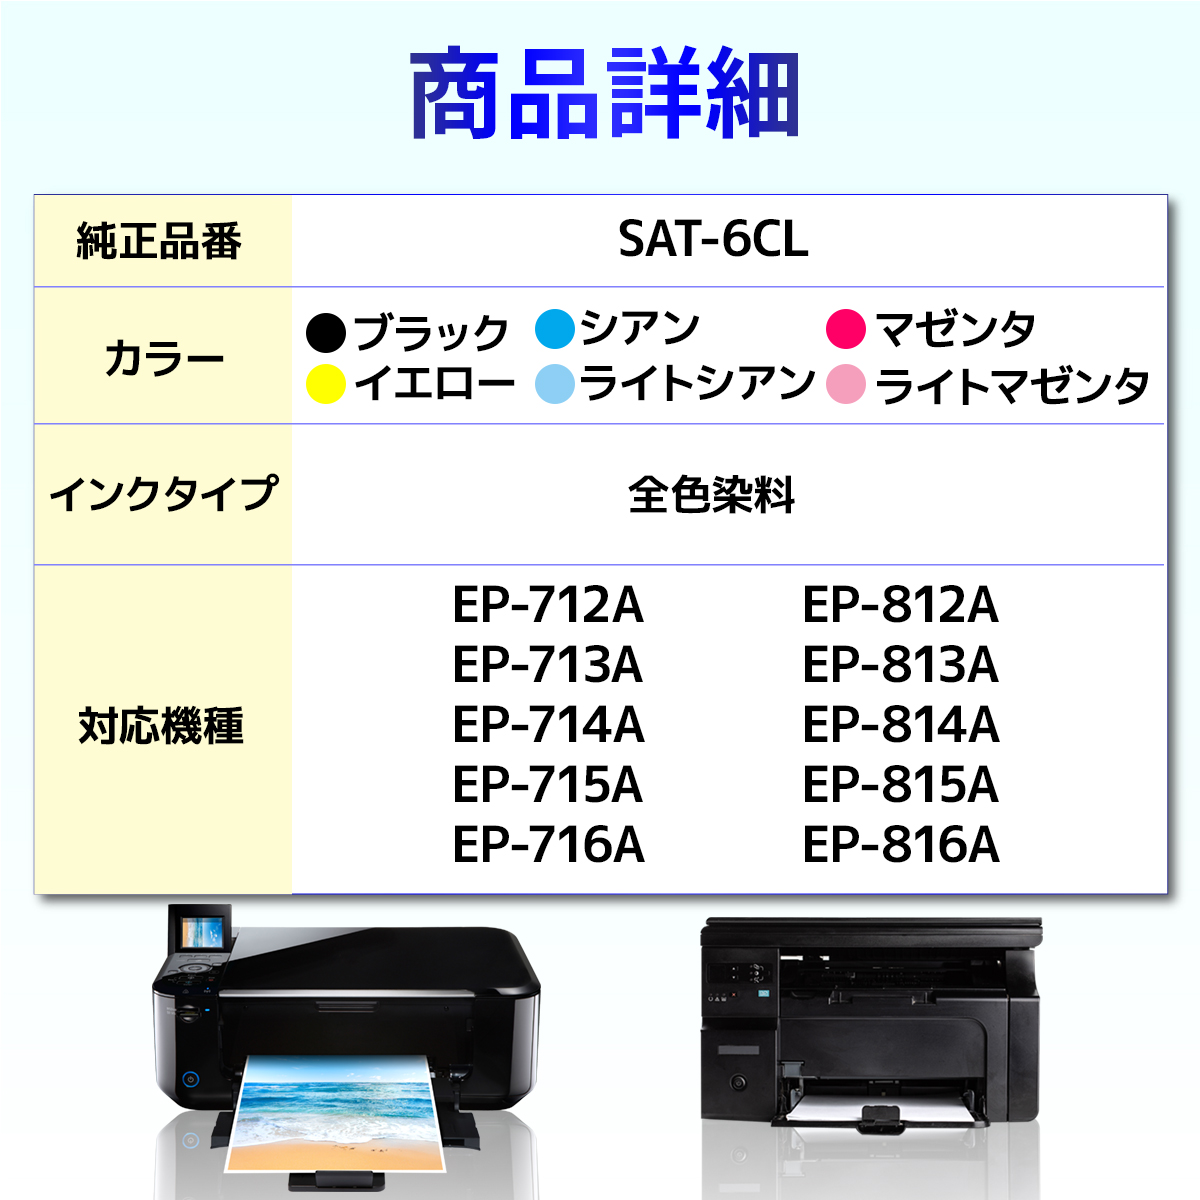 SAT-6CL SAT サツマイモ 互換 インク ブラック ４個 EPSON エプソン EP-712A EP-713A EP-714A EP-715A EP-716A EP-812A EP-813A EP-814A EP-815A EP-816A｜baustore｜03